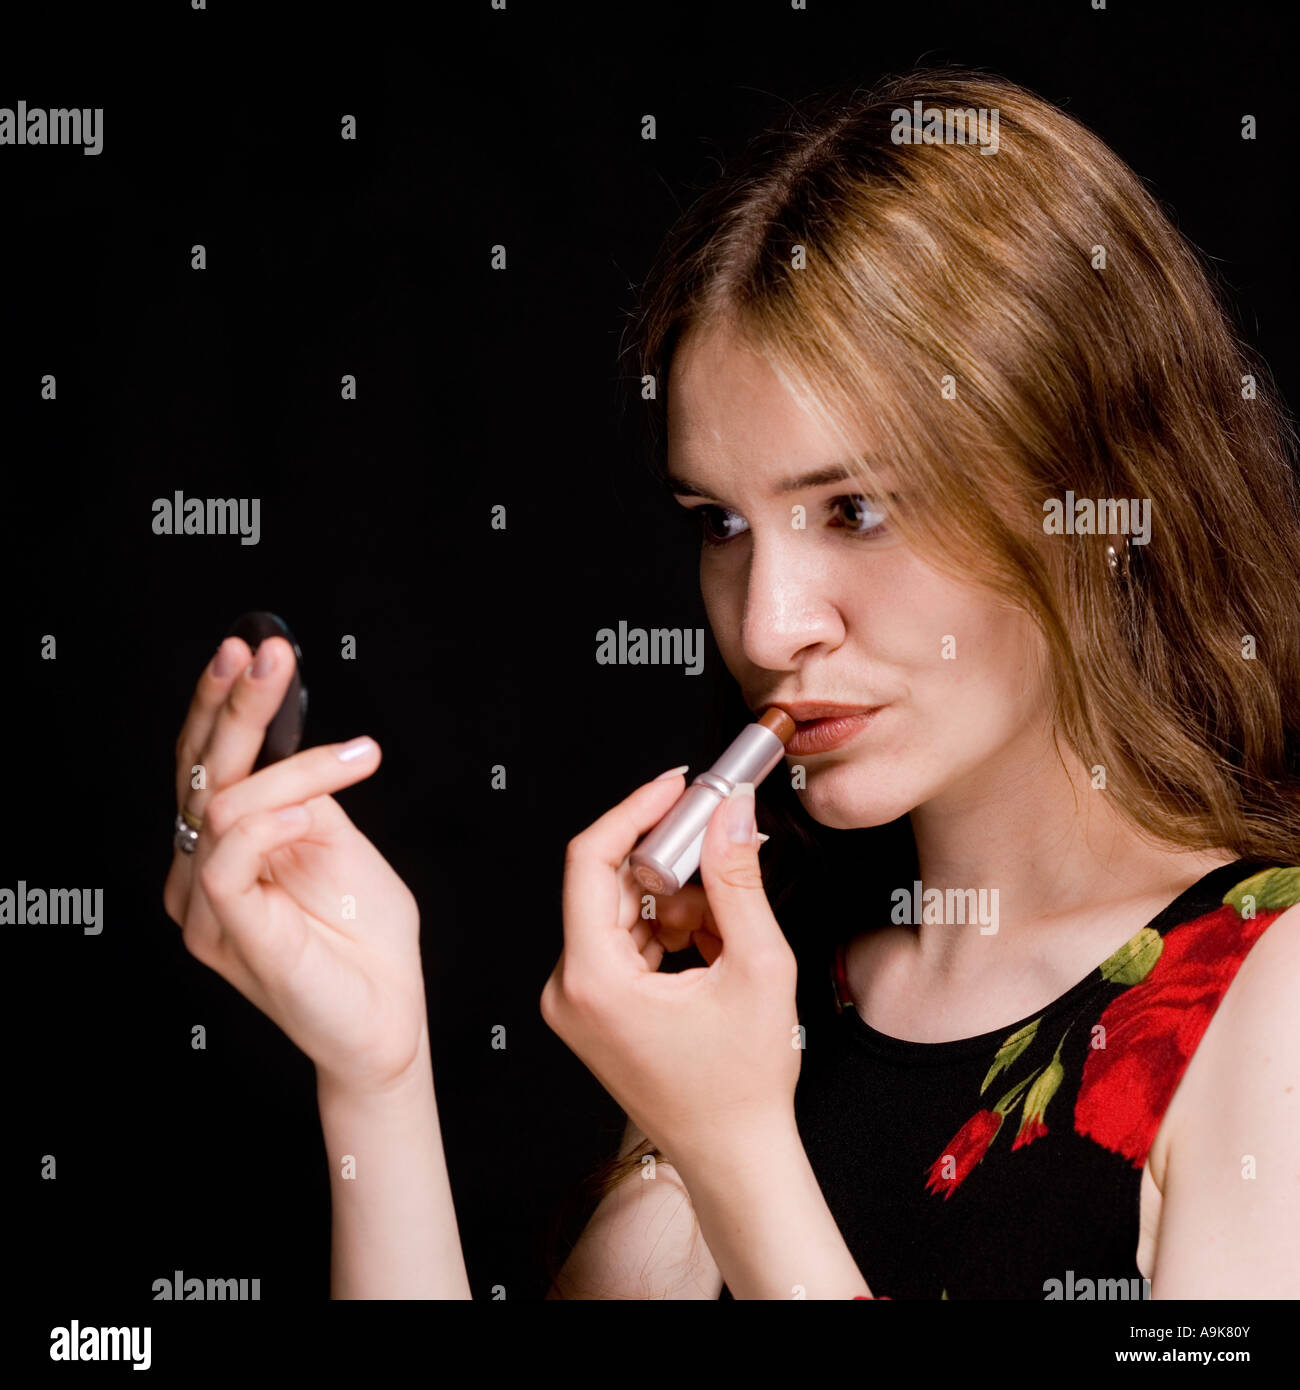 Attractive young woman applying lipstick Banque D'Images